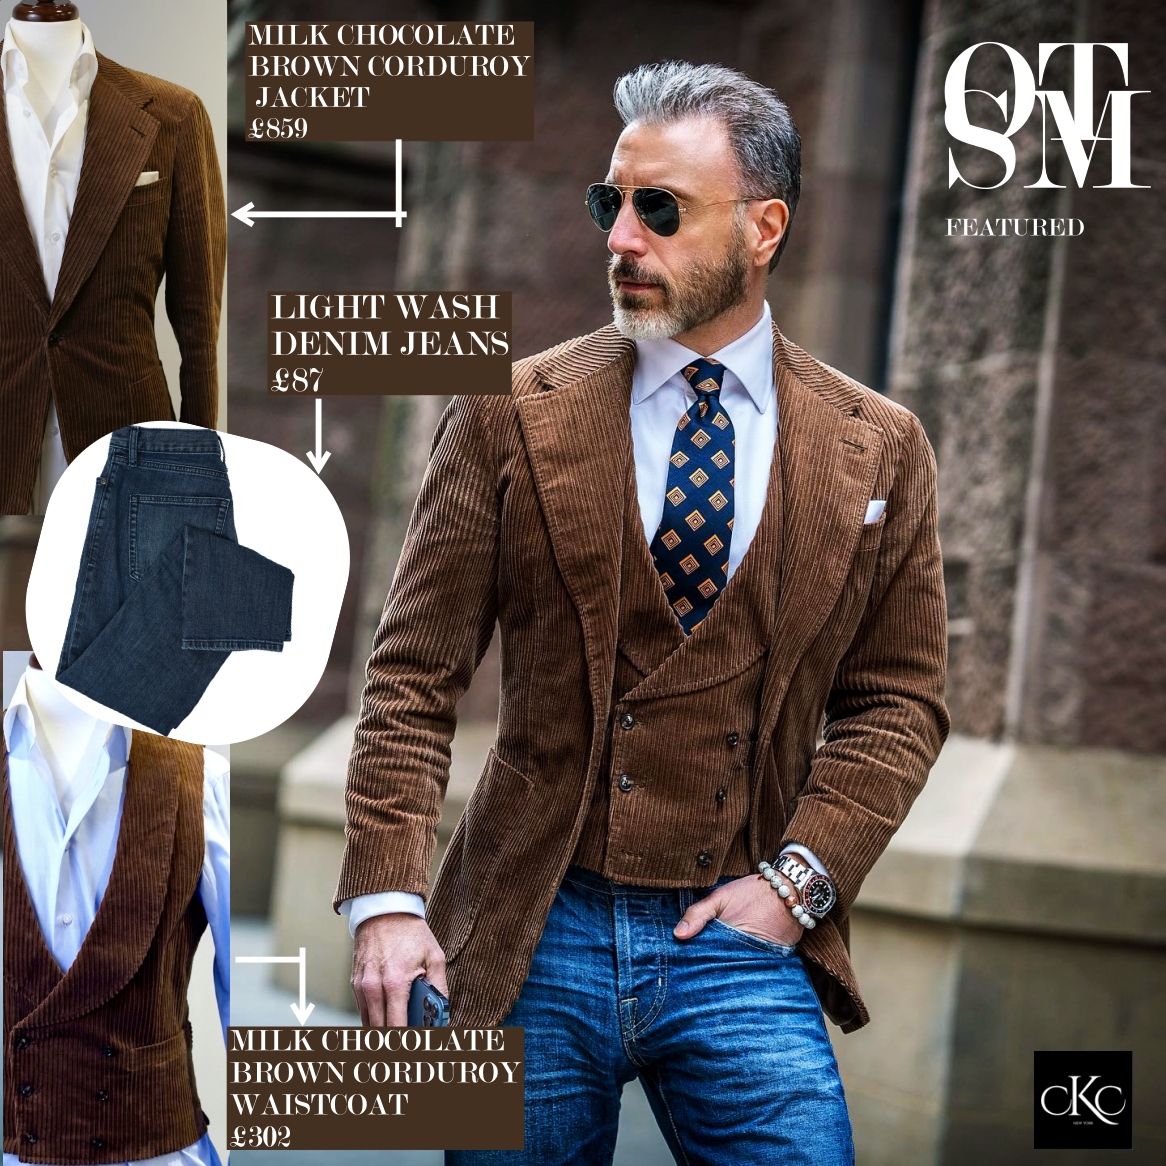 Men’s Fall Fashion Essentials: How to Wear Fall's Best Styles With CKC New York.